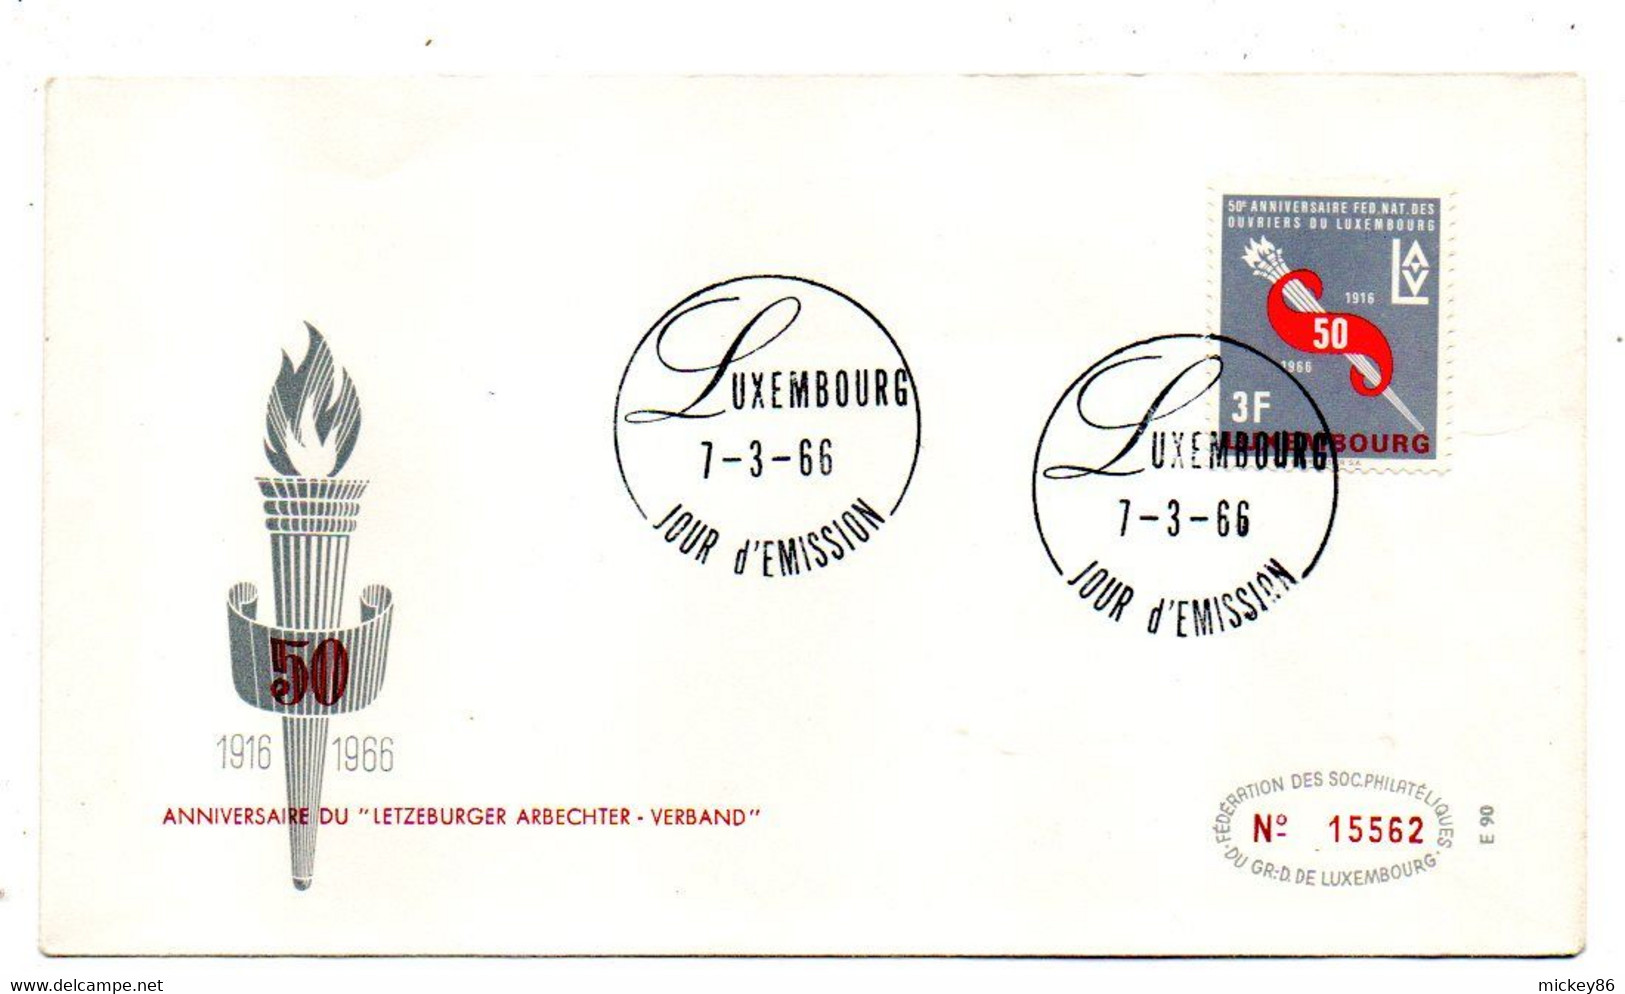 Luxembourg -1966-- FDC-50° Anniv Du Letzeburger Arbechter-Verband-n°15562...cachet LUXEMBOURG - FDC